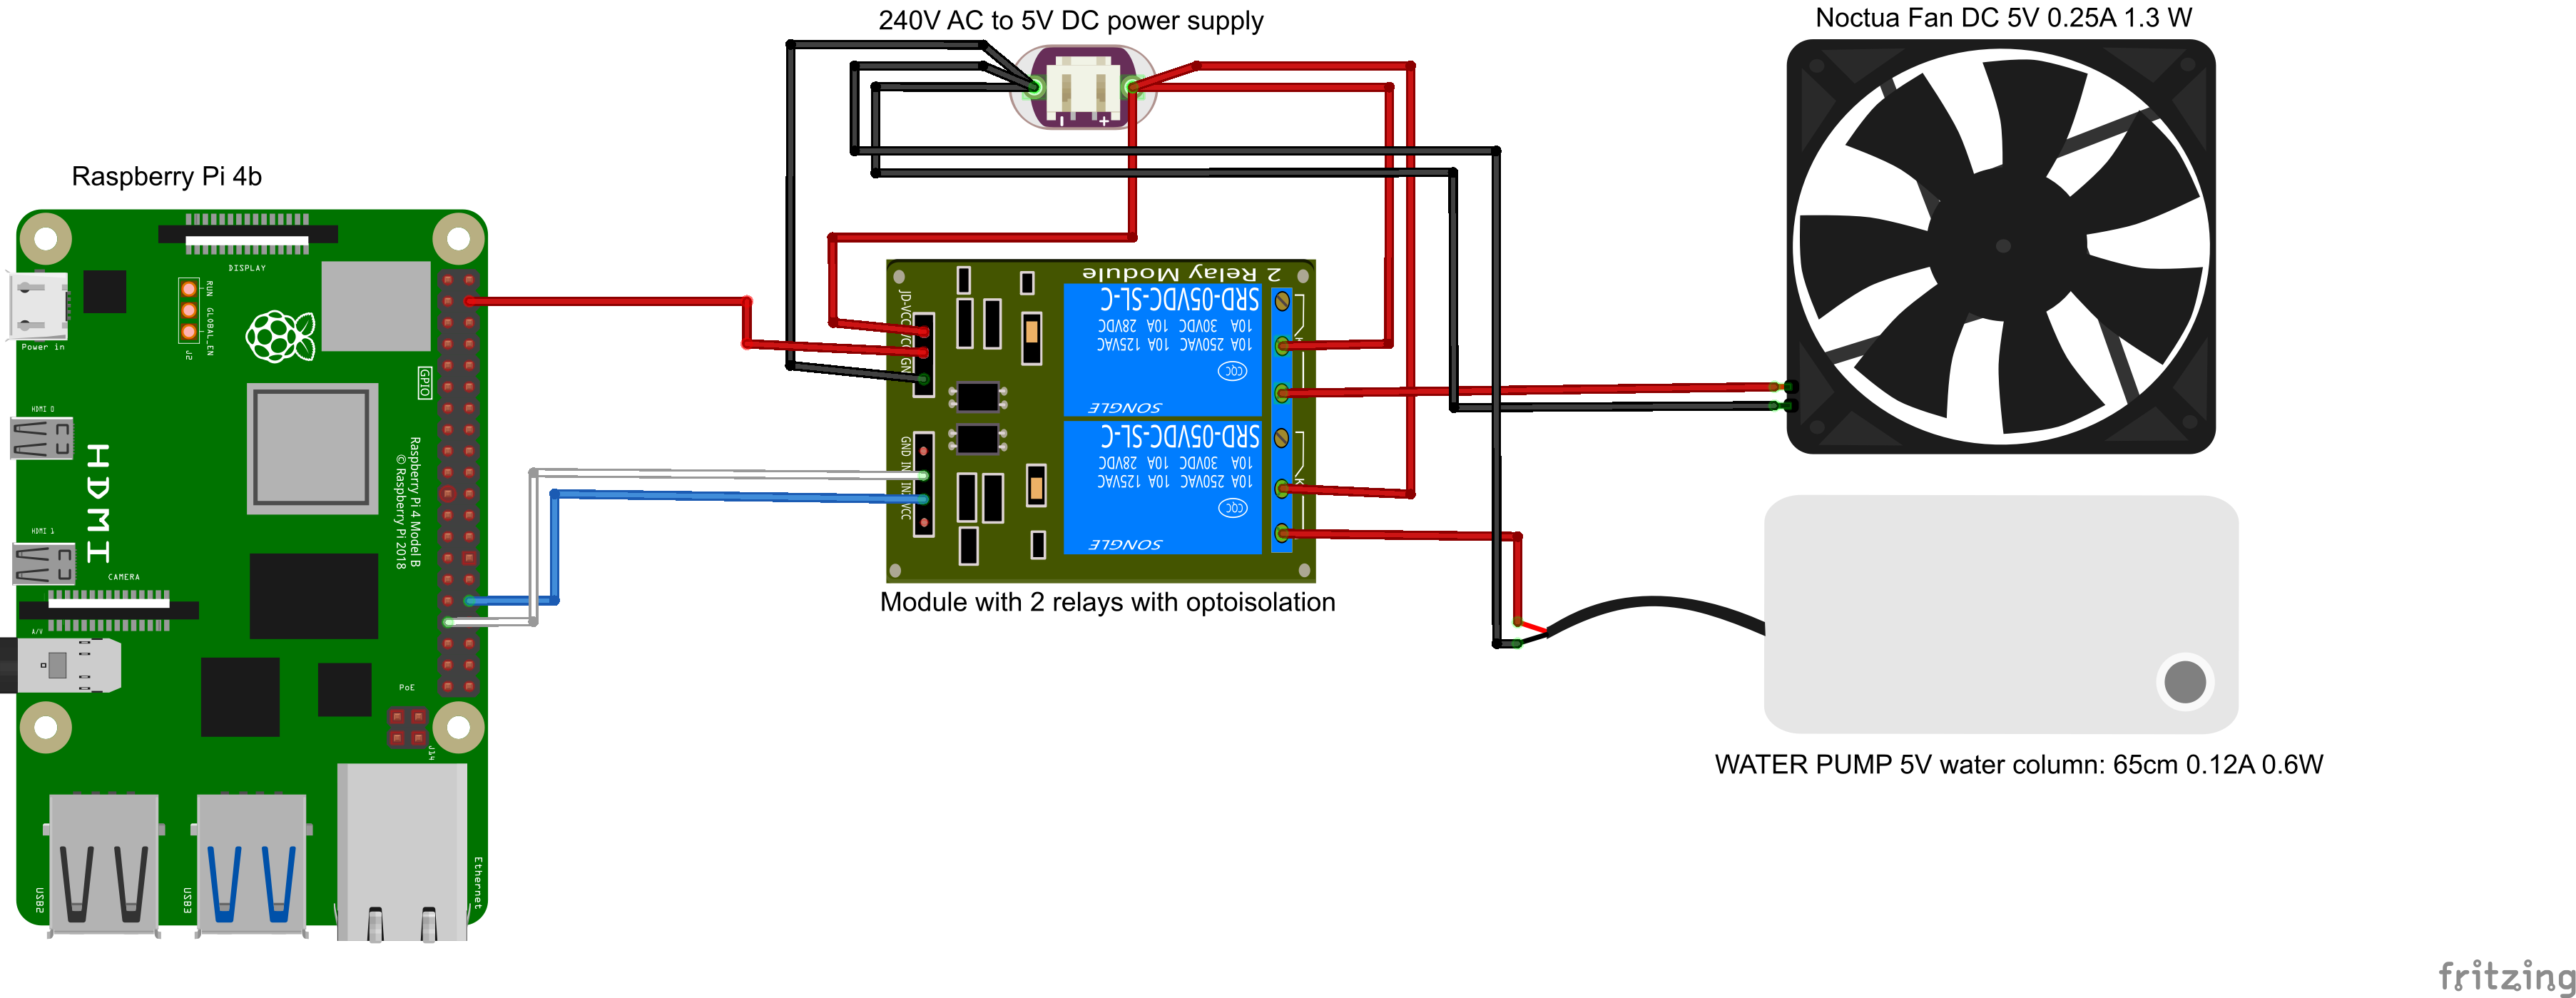 module with relays - wiring